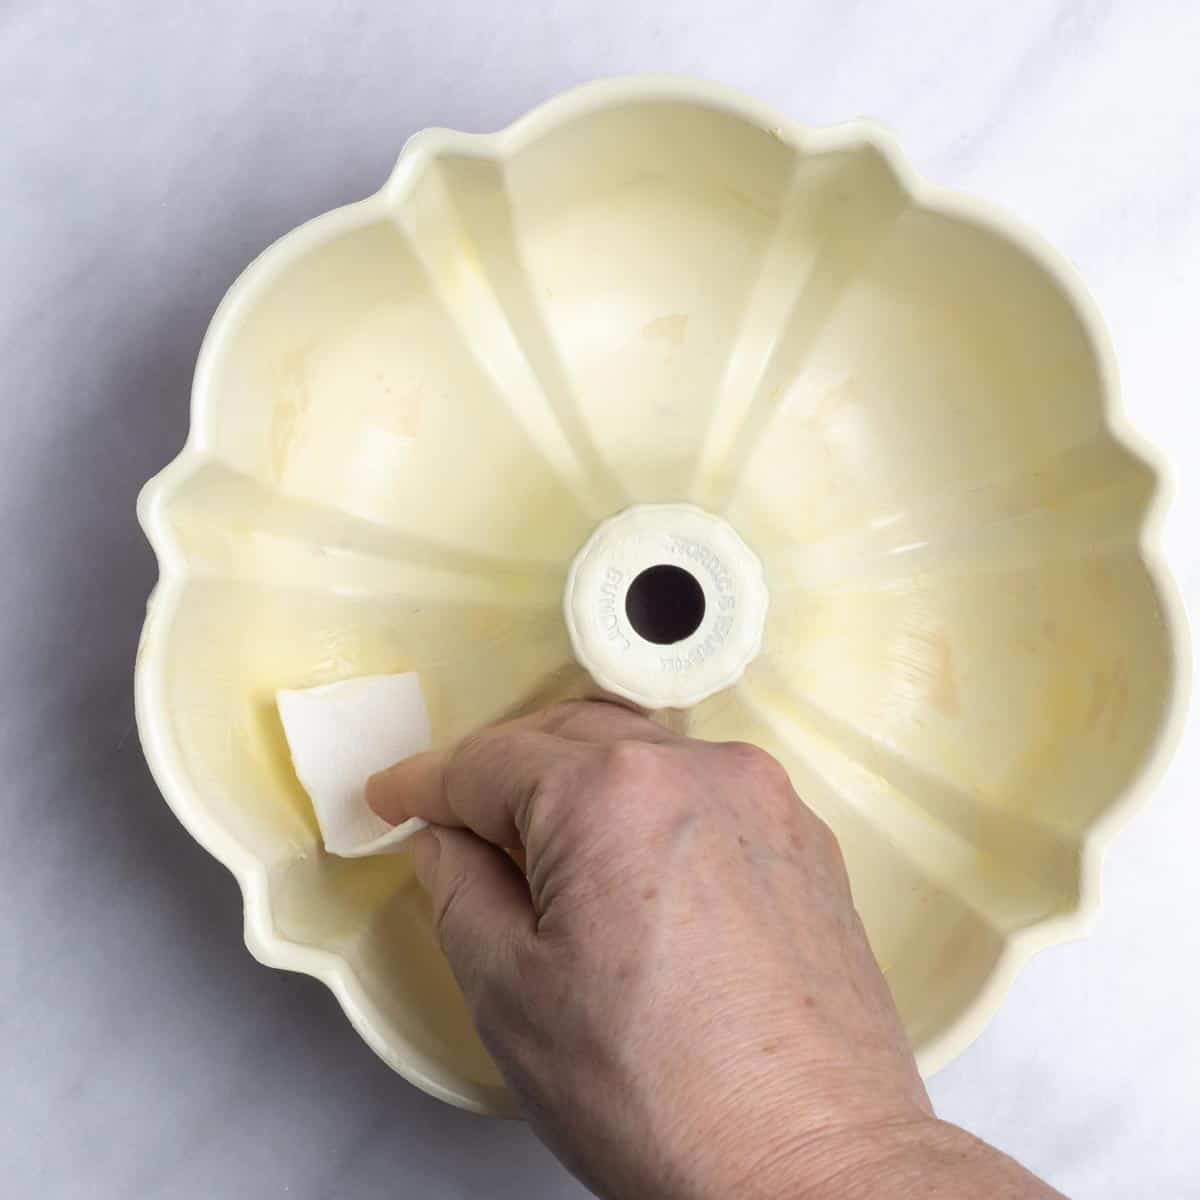 Hand with a paper towel piece greasing the inside of a bundt pan with butter.